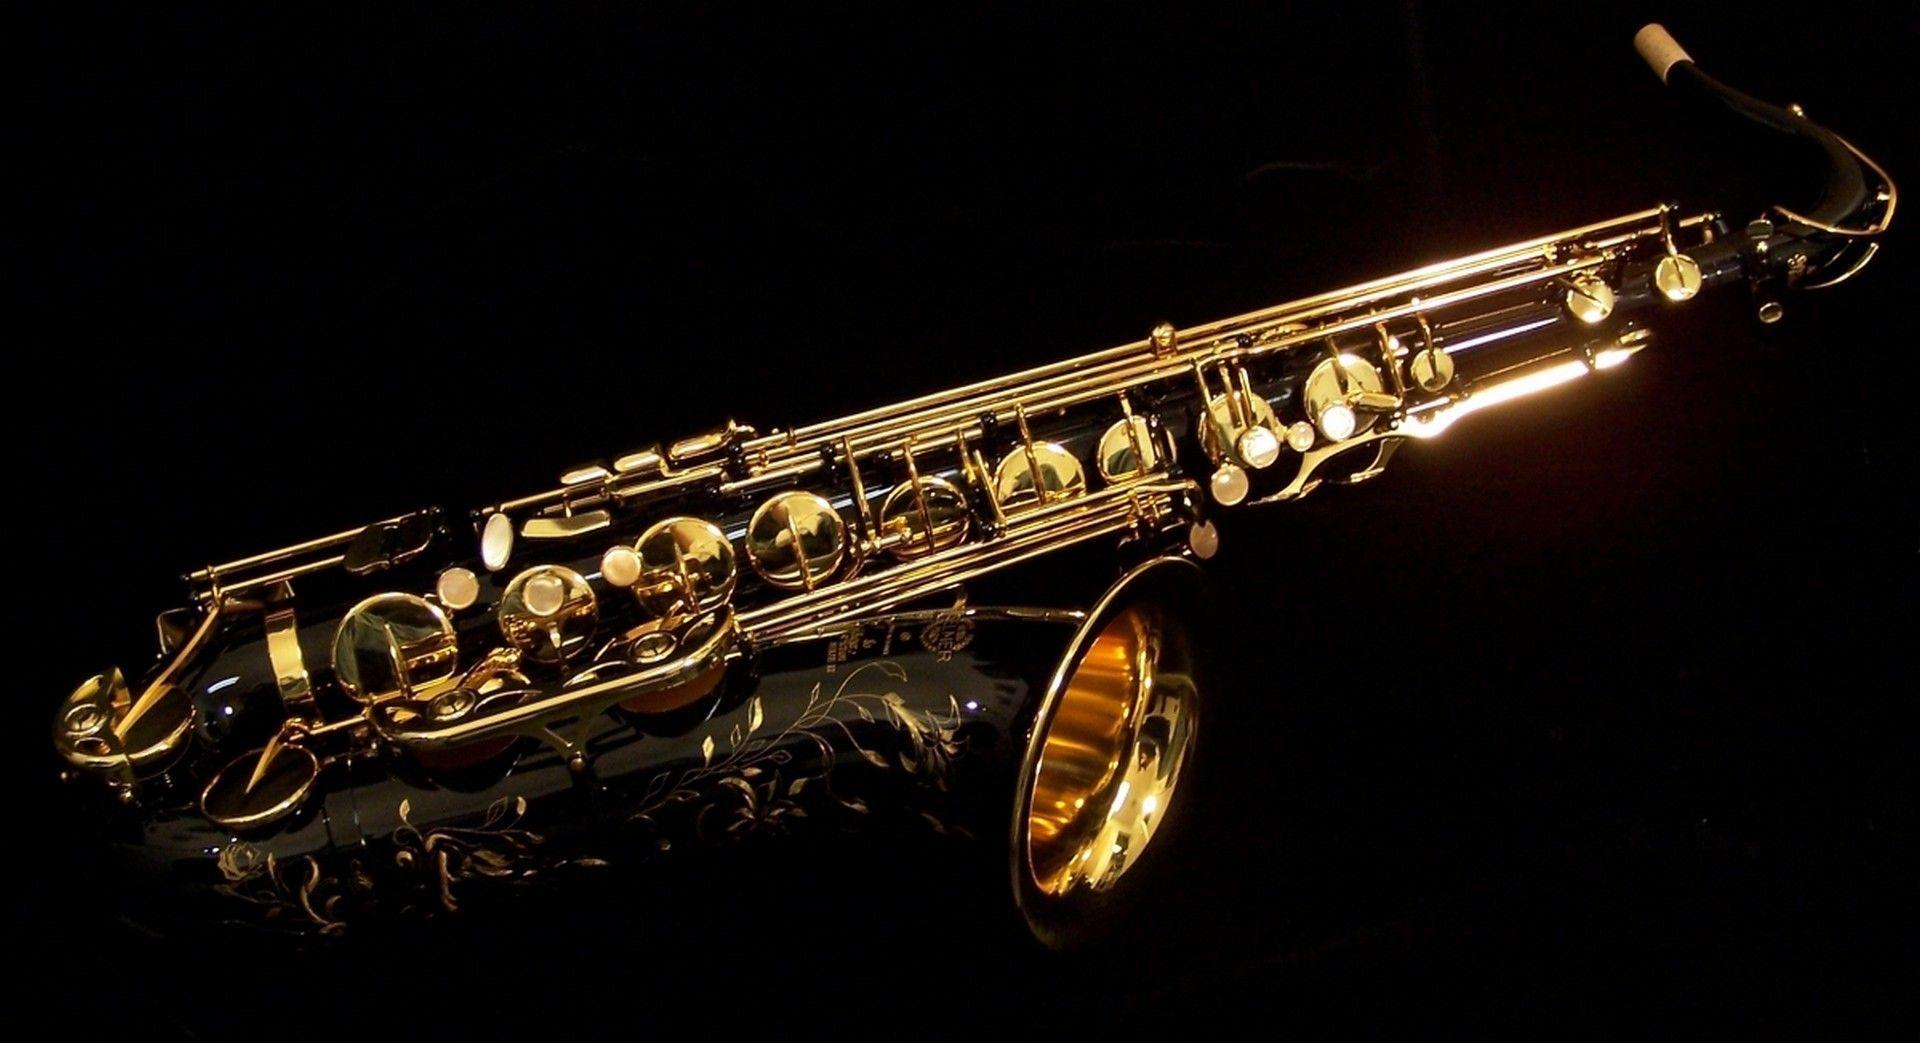 Saxophone Wallpapers HD Saxophone Backgrounds Free Images Download